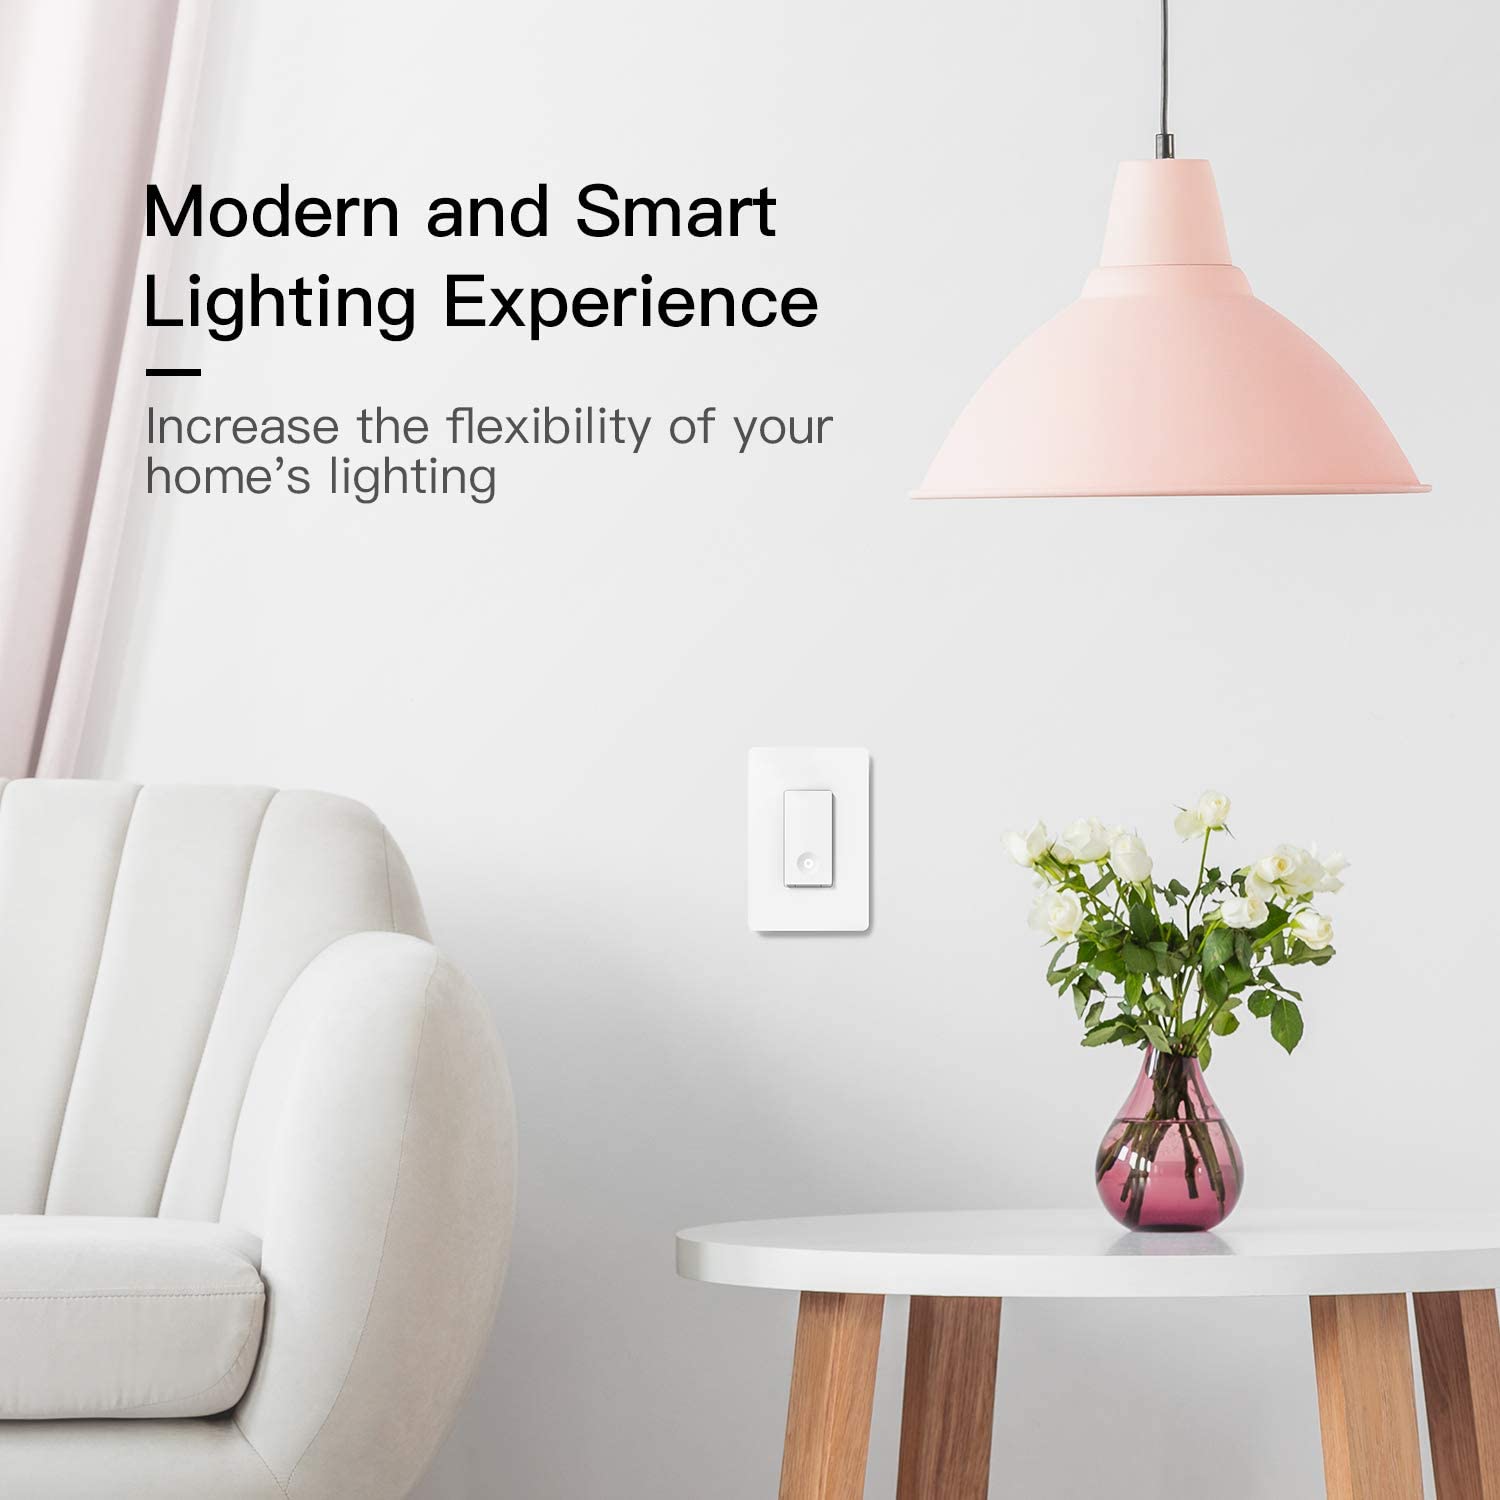 Treatlife’s Smart Switches offer an easy way to implement smart home features